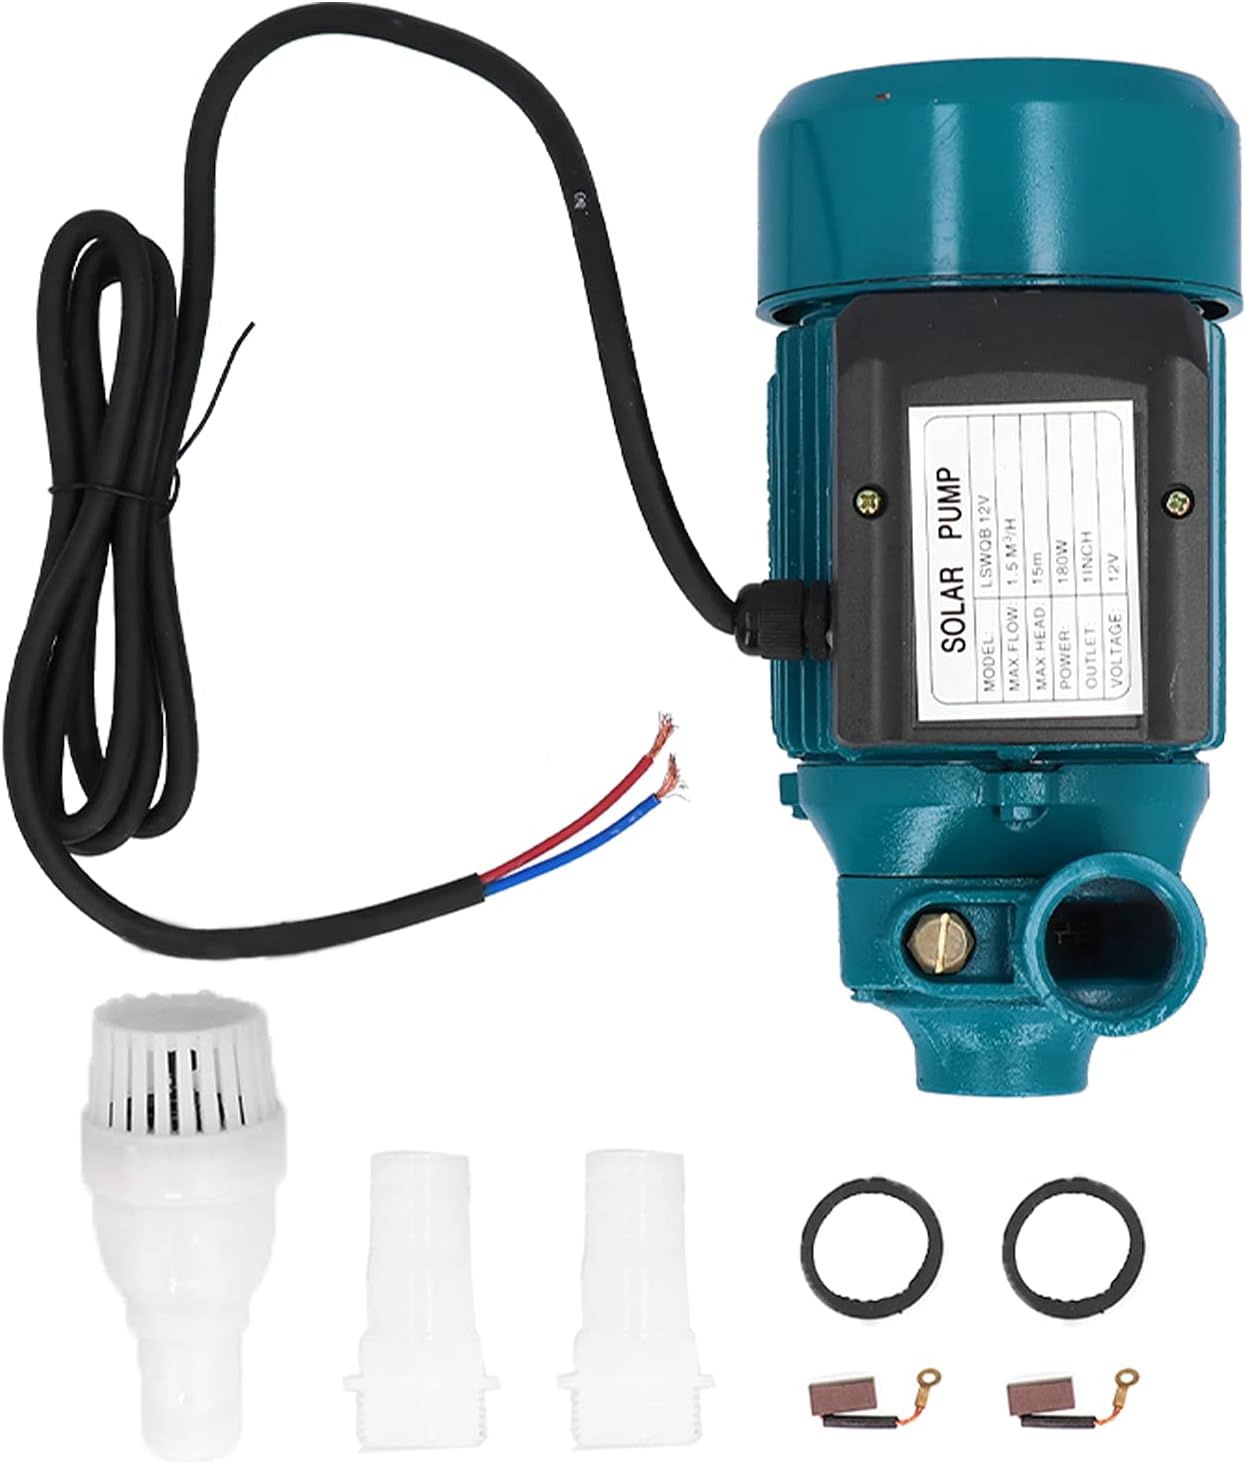 Portable Water Pump Review